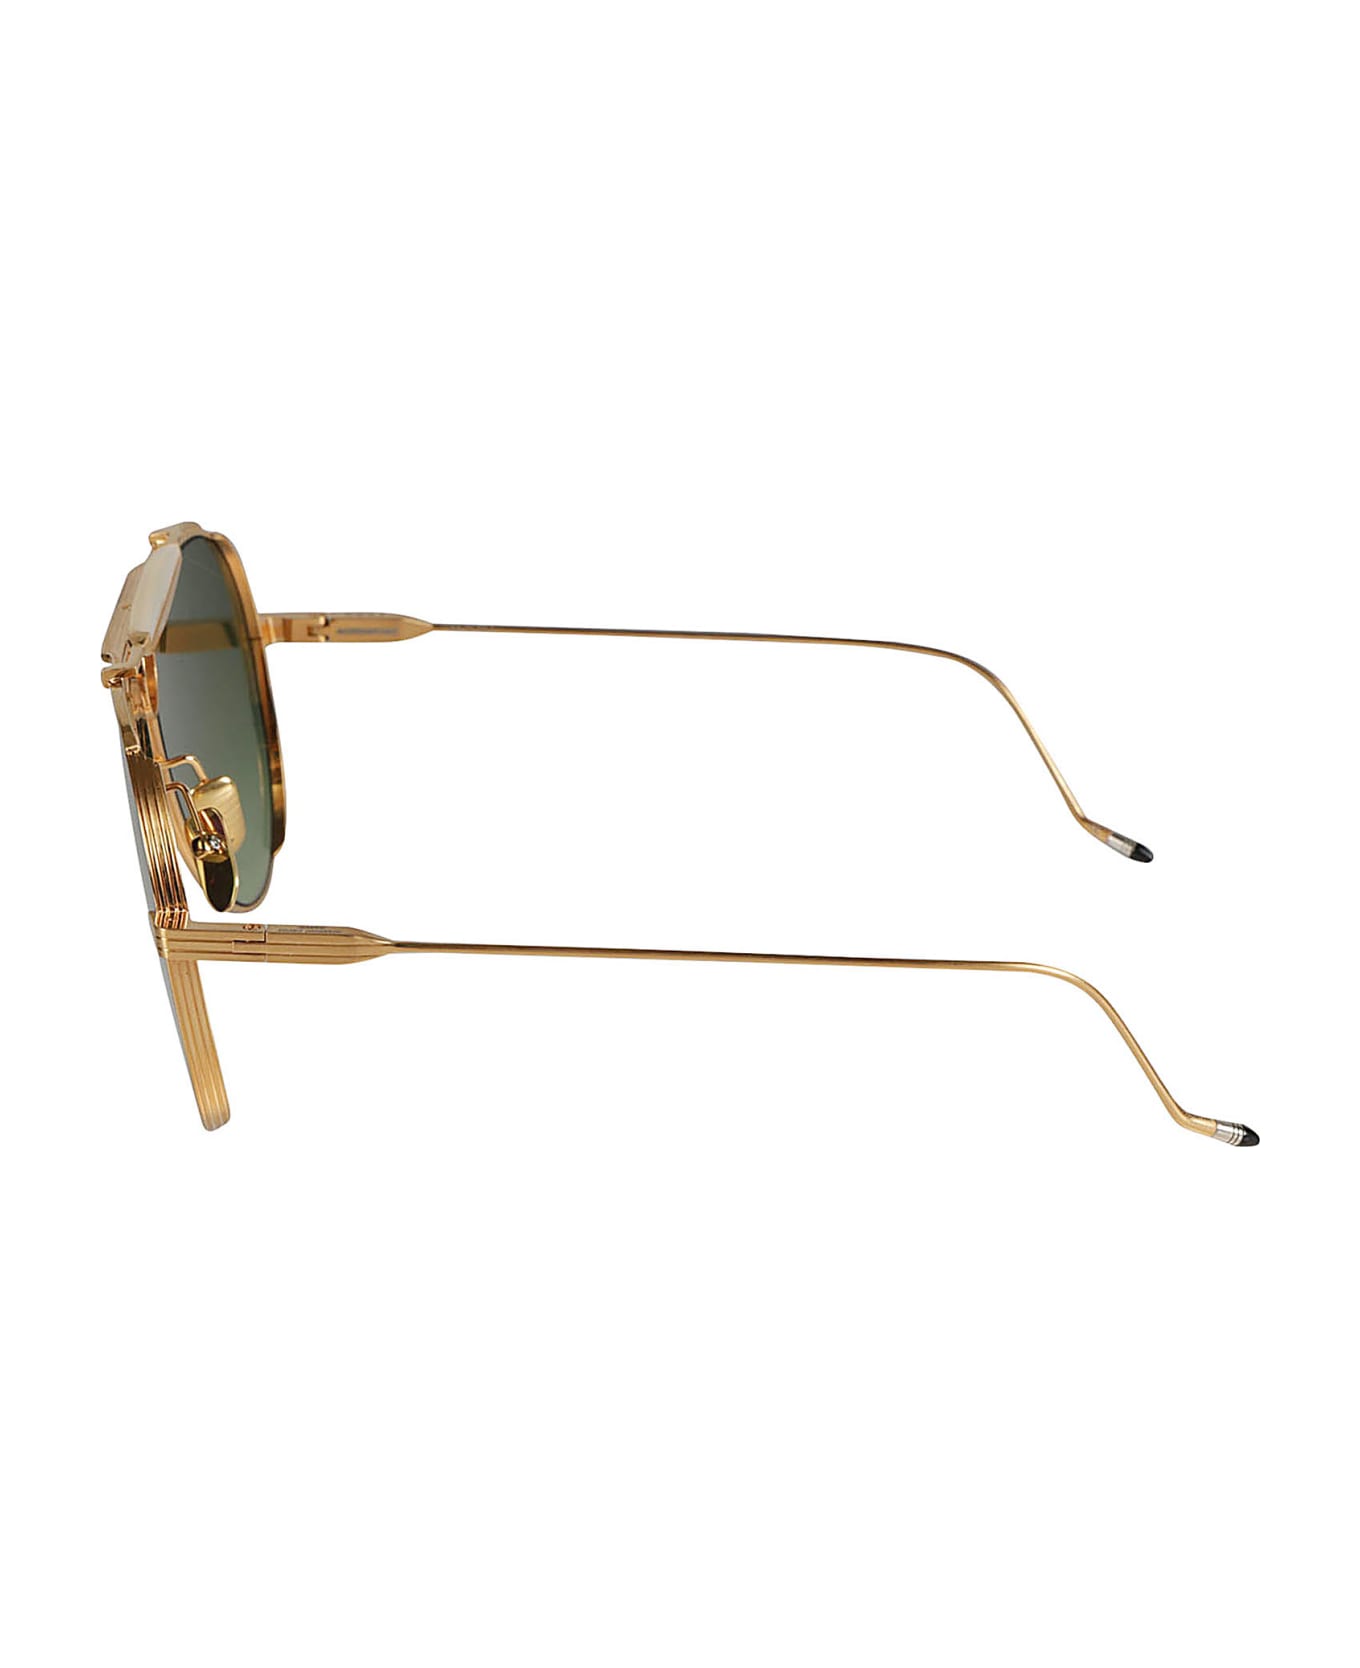 Jacques Marie Mage Gonzo Sunglasses - Gold